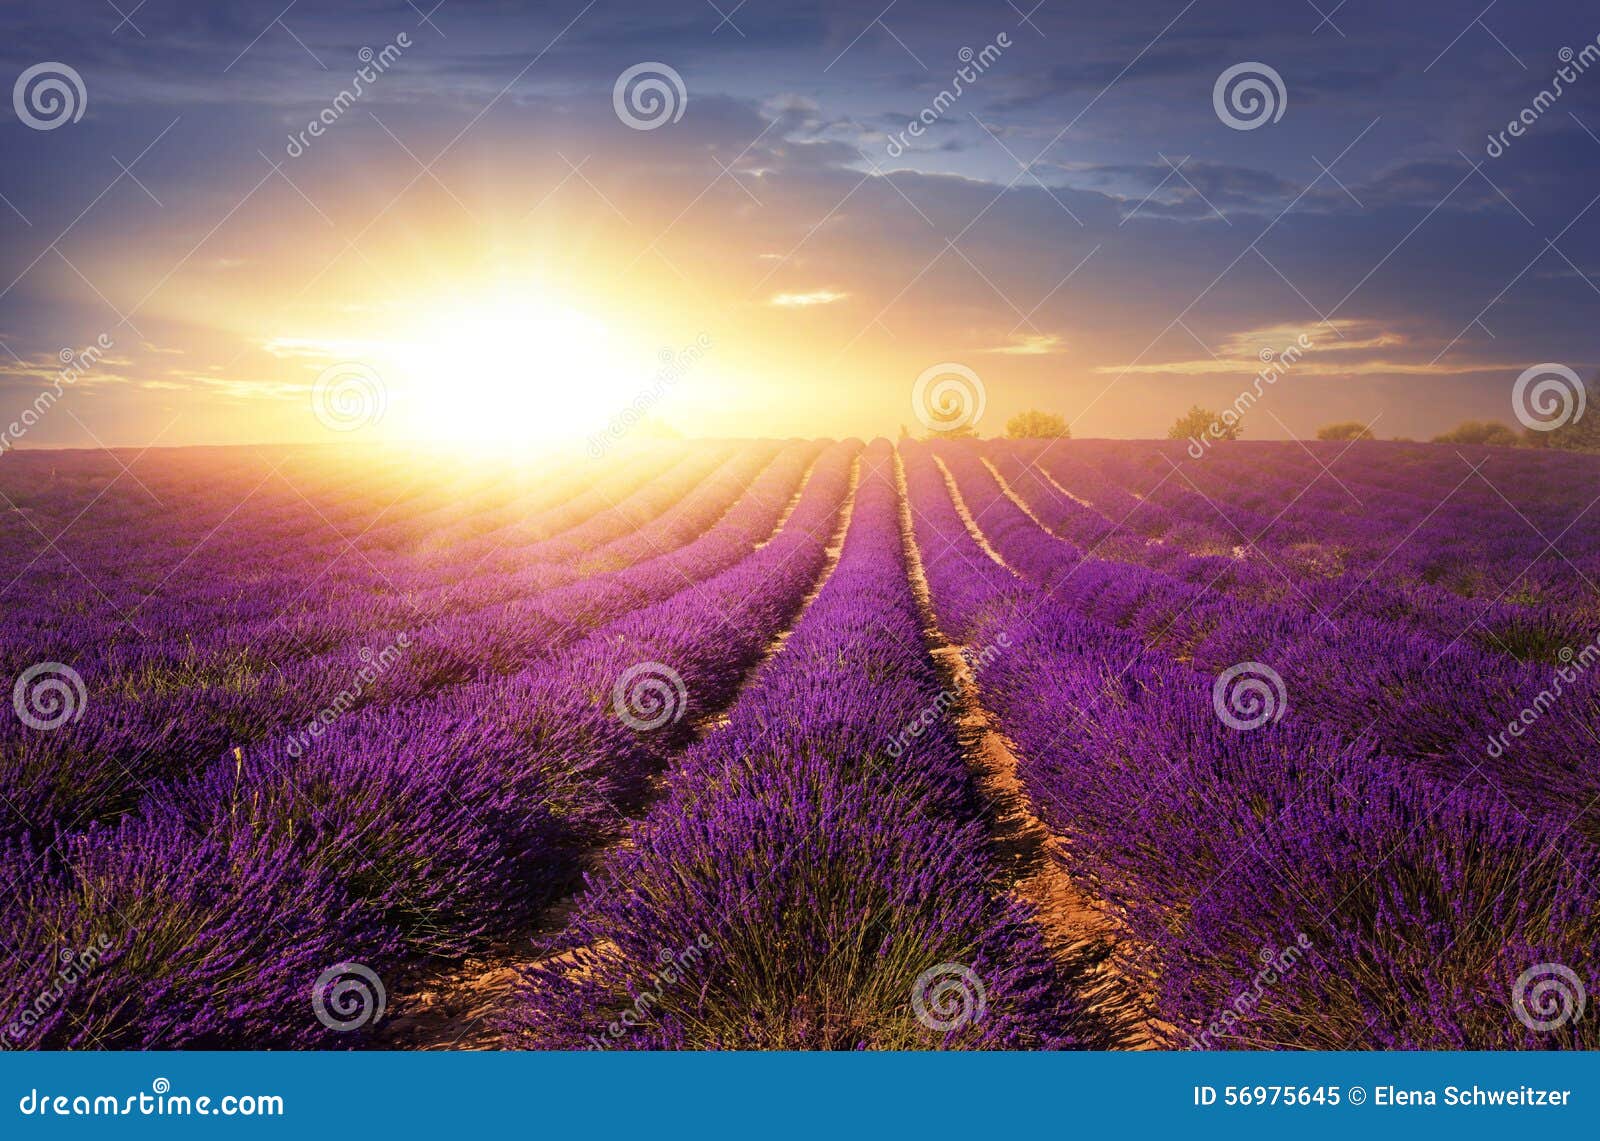 Lavender field stock image. Image of agriculture, dramatic - 56975645